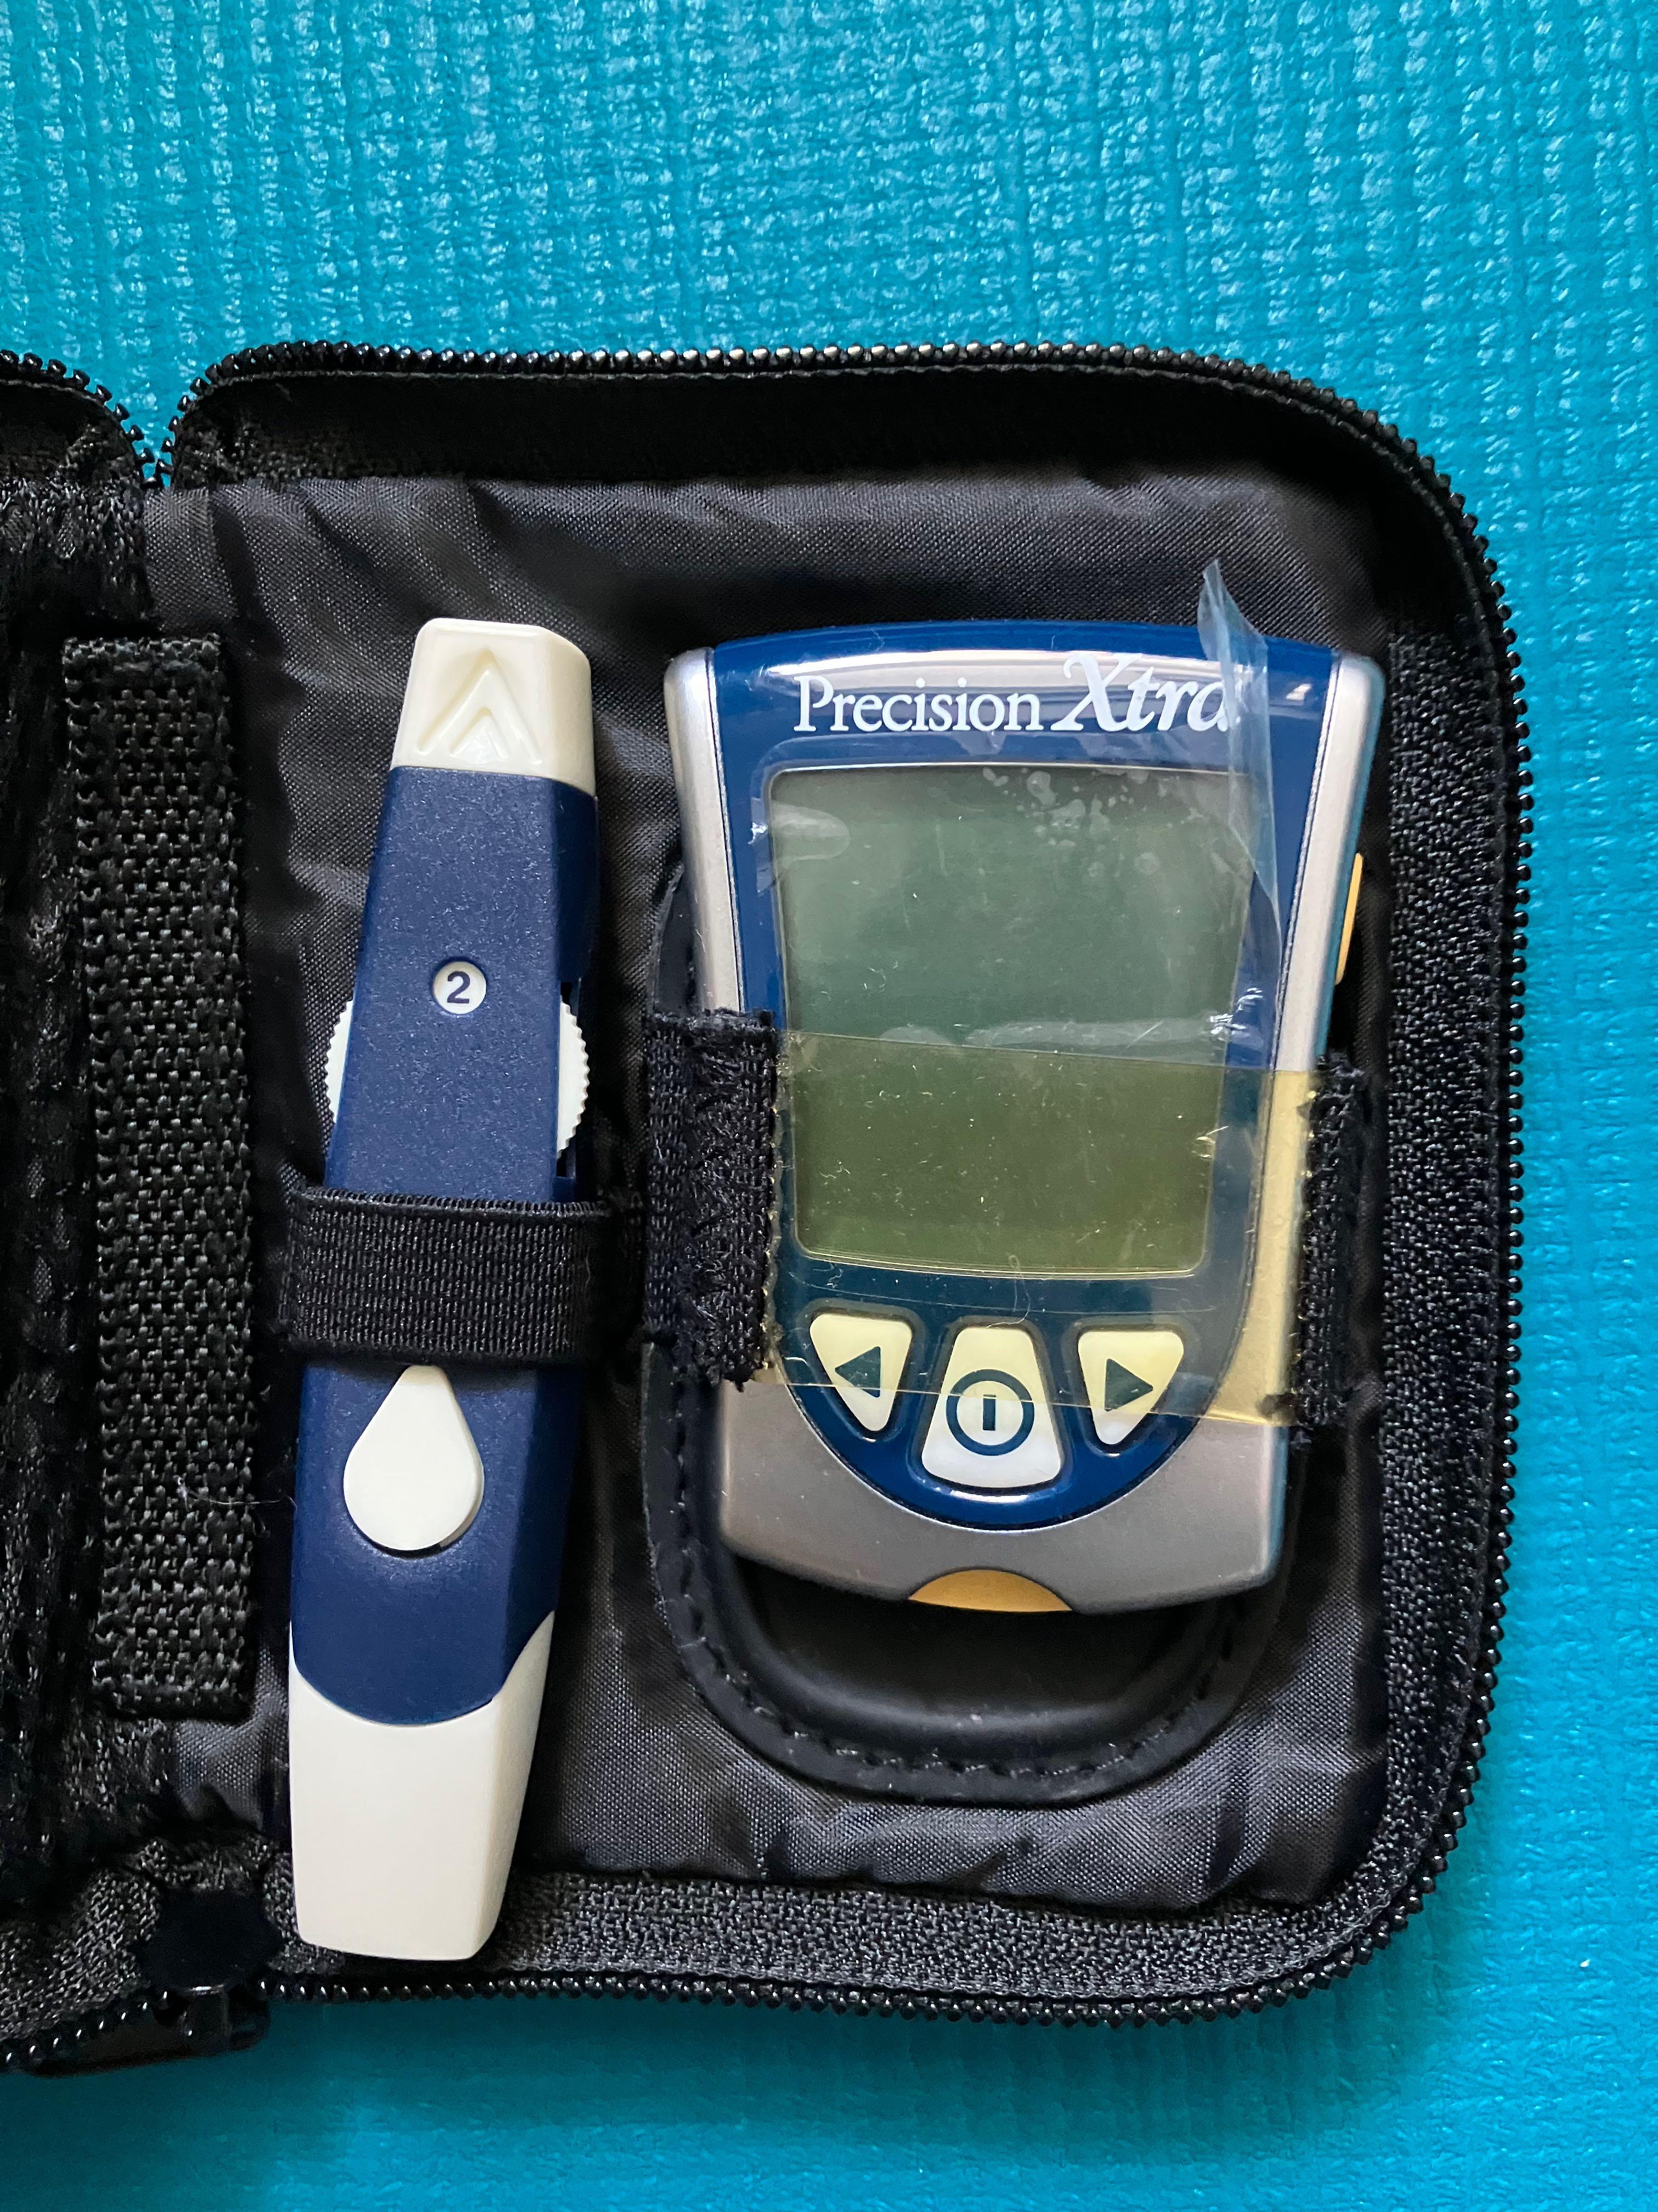 Precision Xtra Blood Glucose Meter